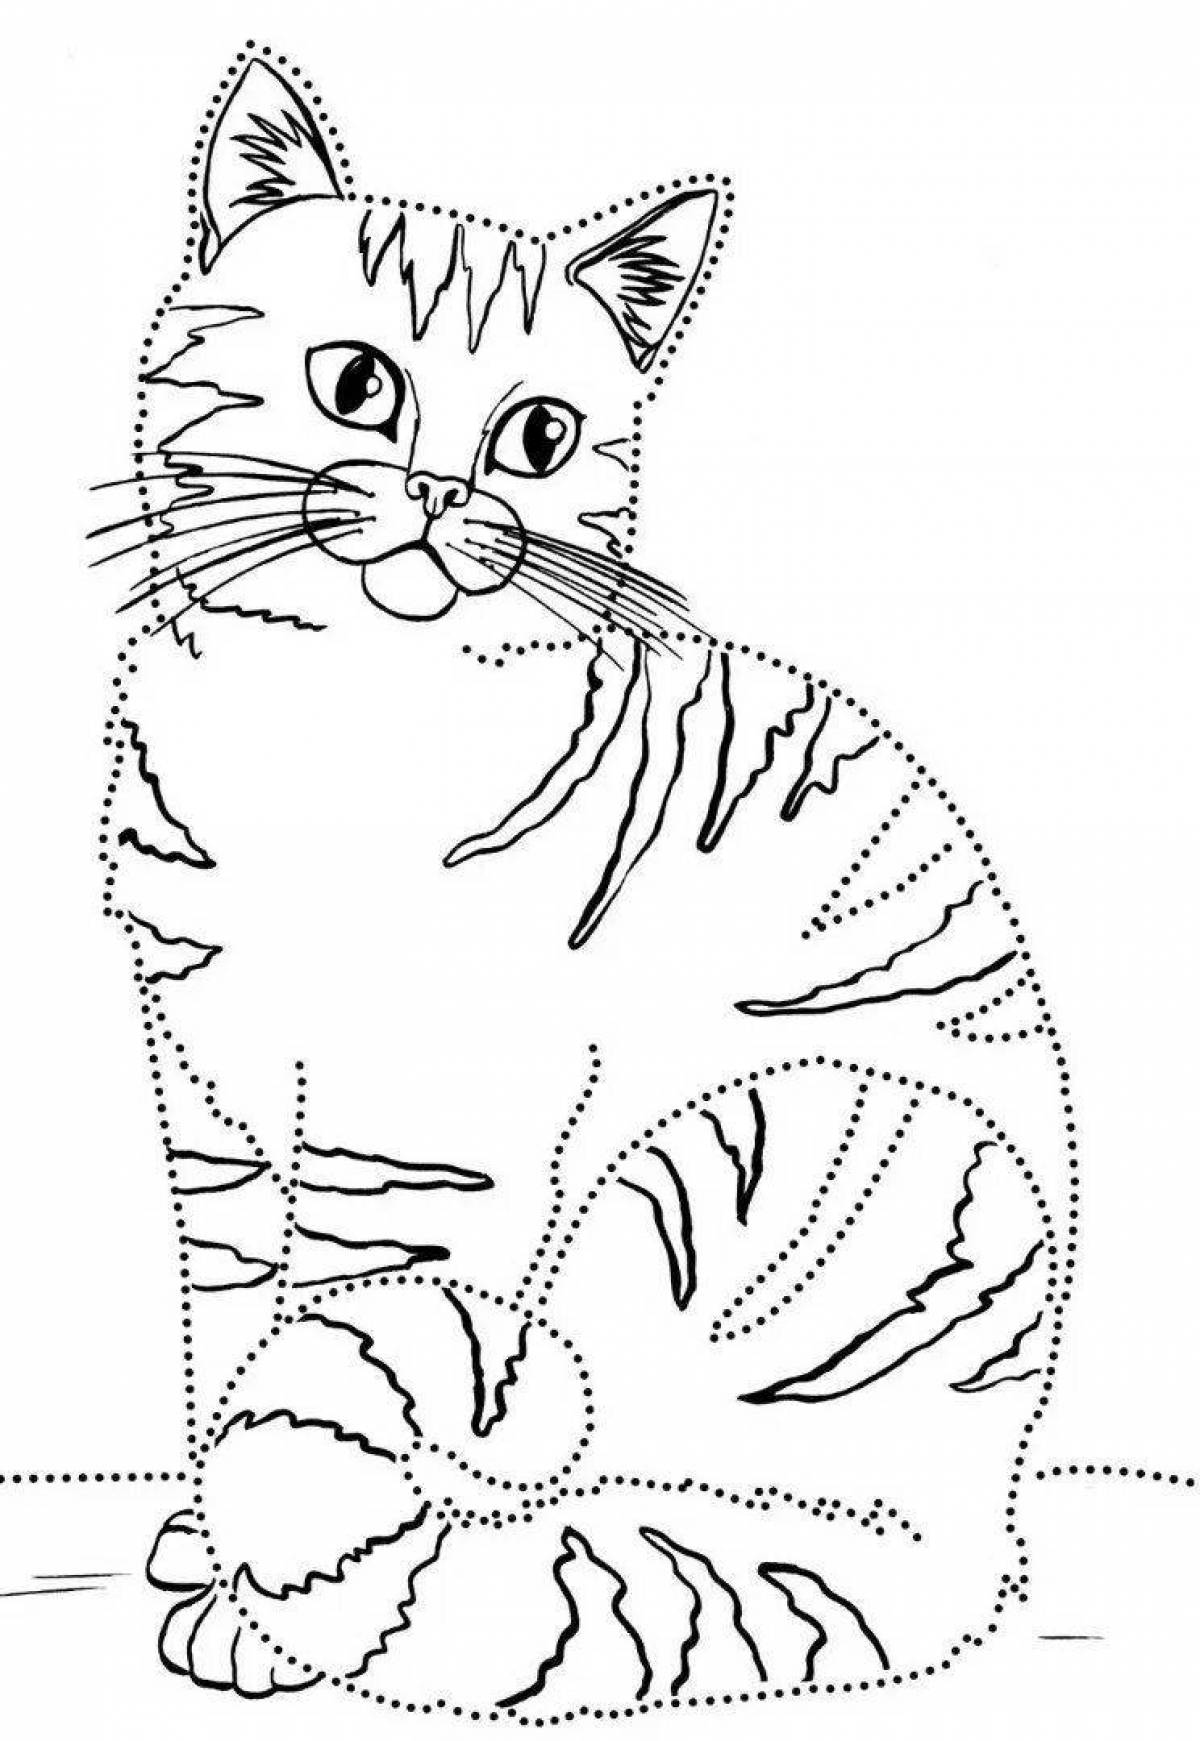 Coloring page happy dotted cat